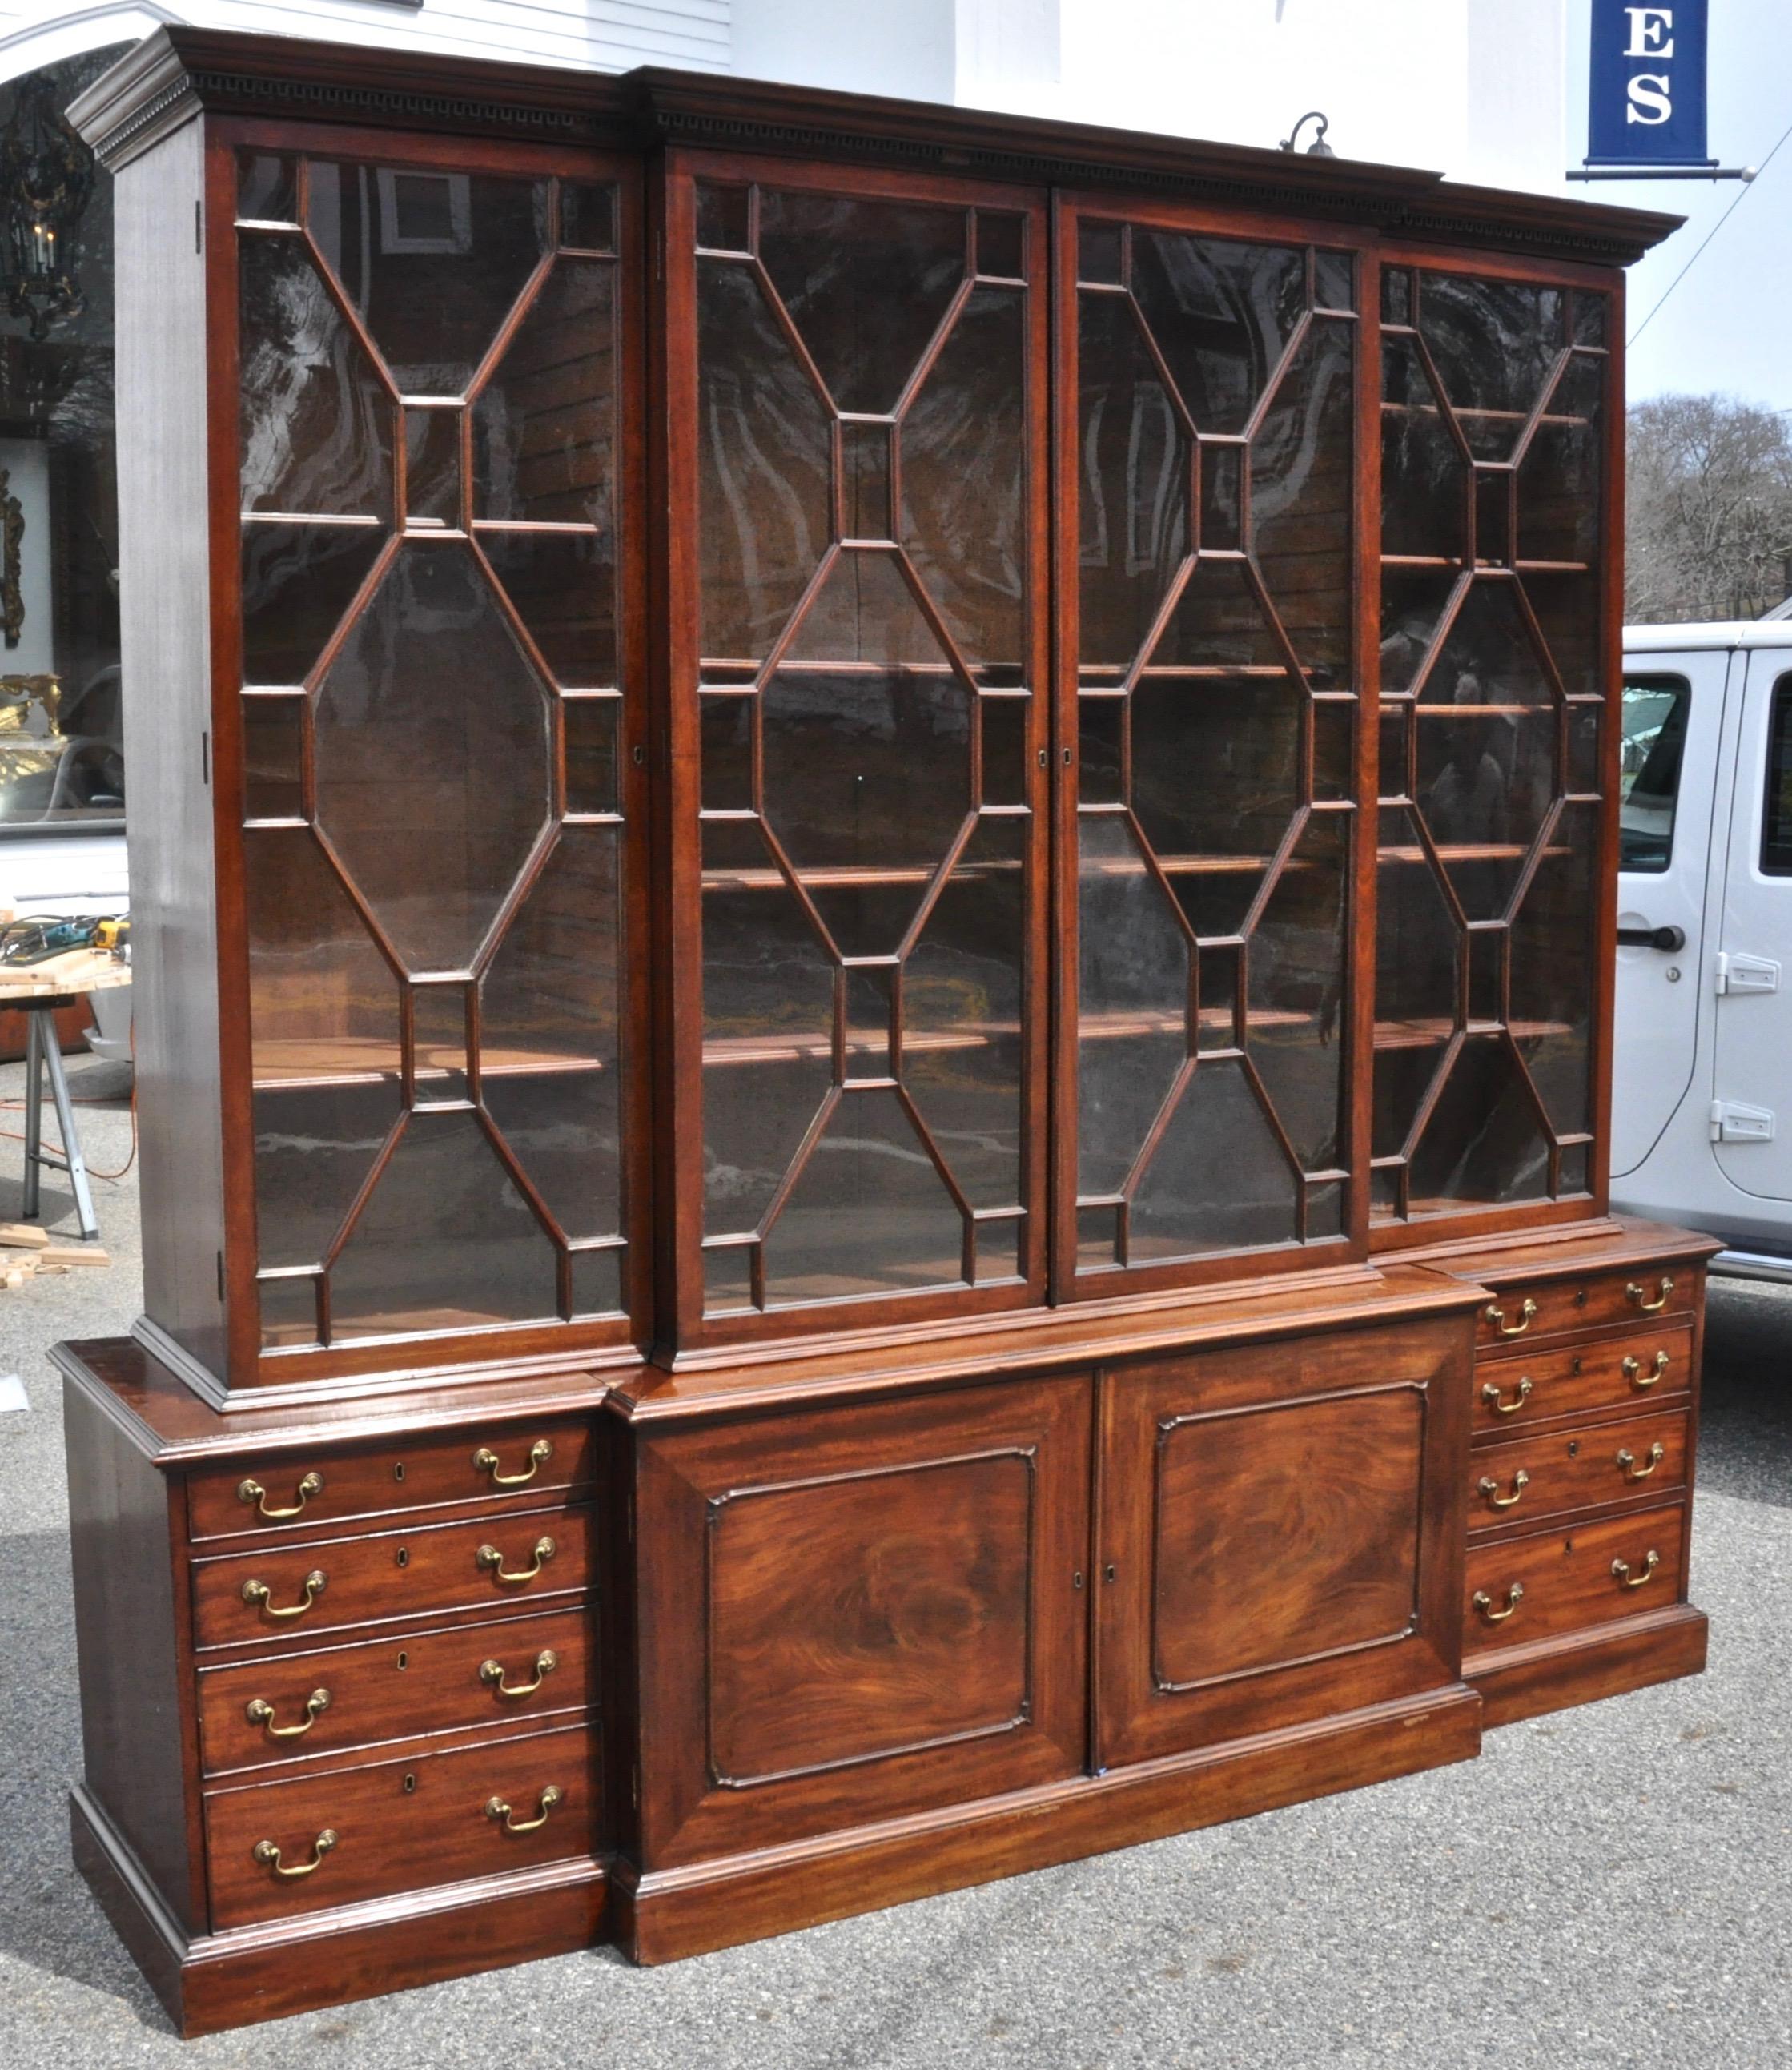 Period 18th century Georgian step front breakfront bookcase cabinet

--Beautifully figured mahogany bookmatched throughout. Early finish with excellent mellow patina
Minor restorations through time though nothing significant. Original shelves and